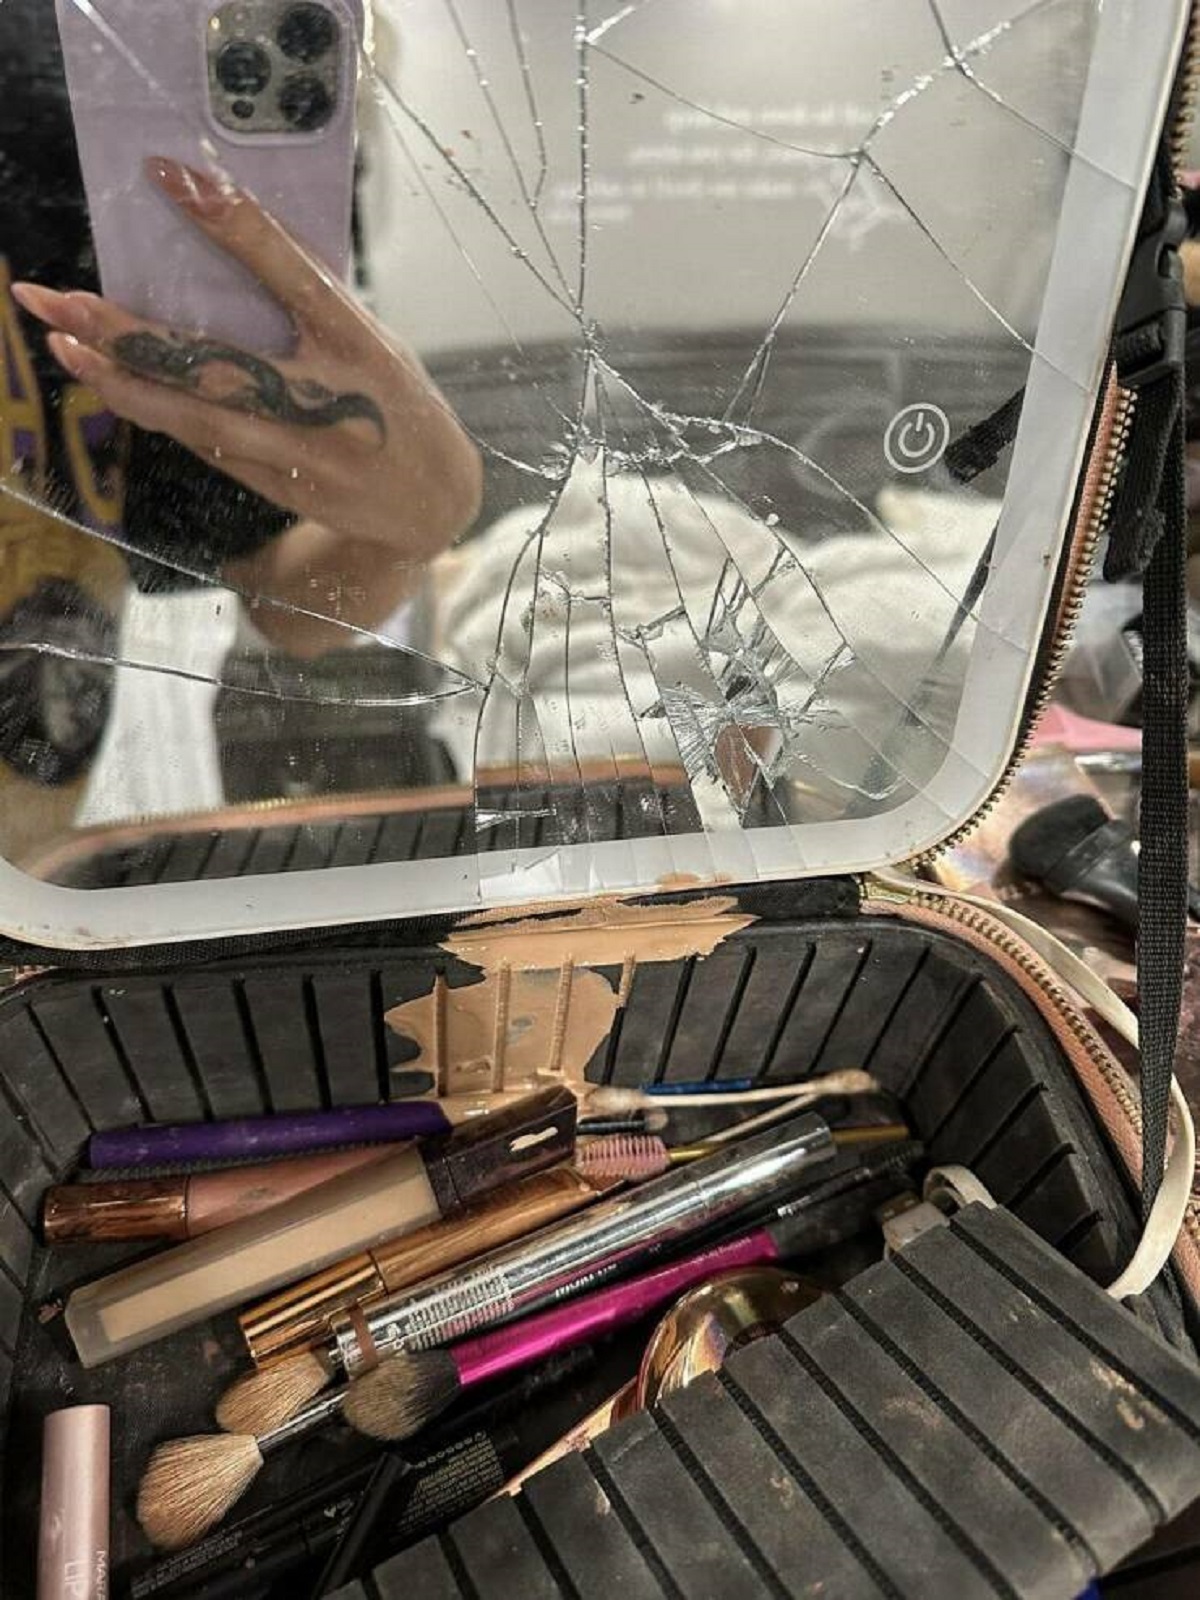 "My GF put her makeup set in her luggage"